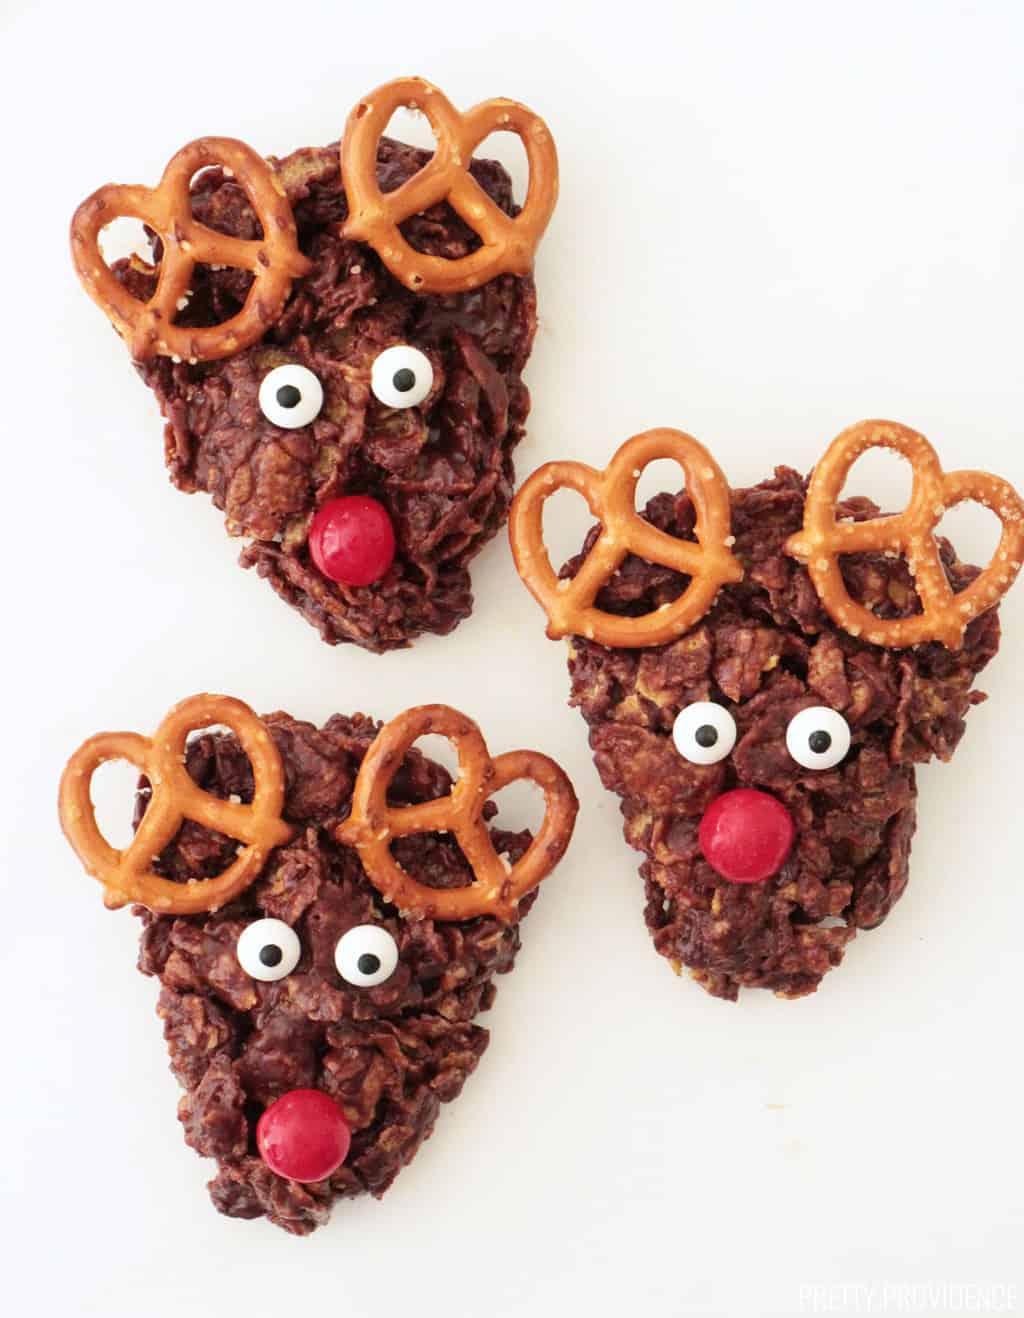 Three reindeer cookies made with cornflakes, marshmallows, pretzels, chocolate and candies.